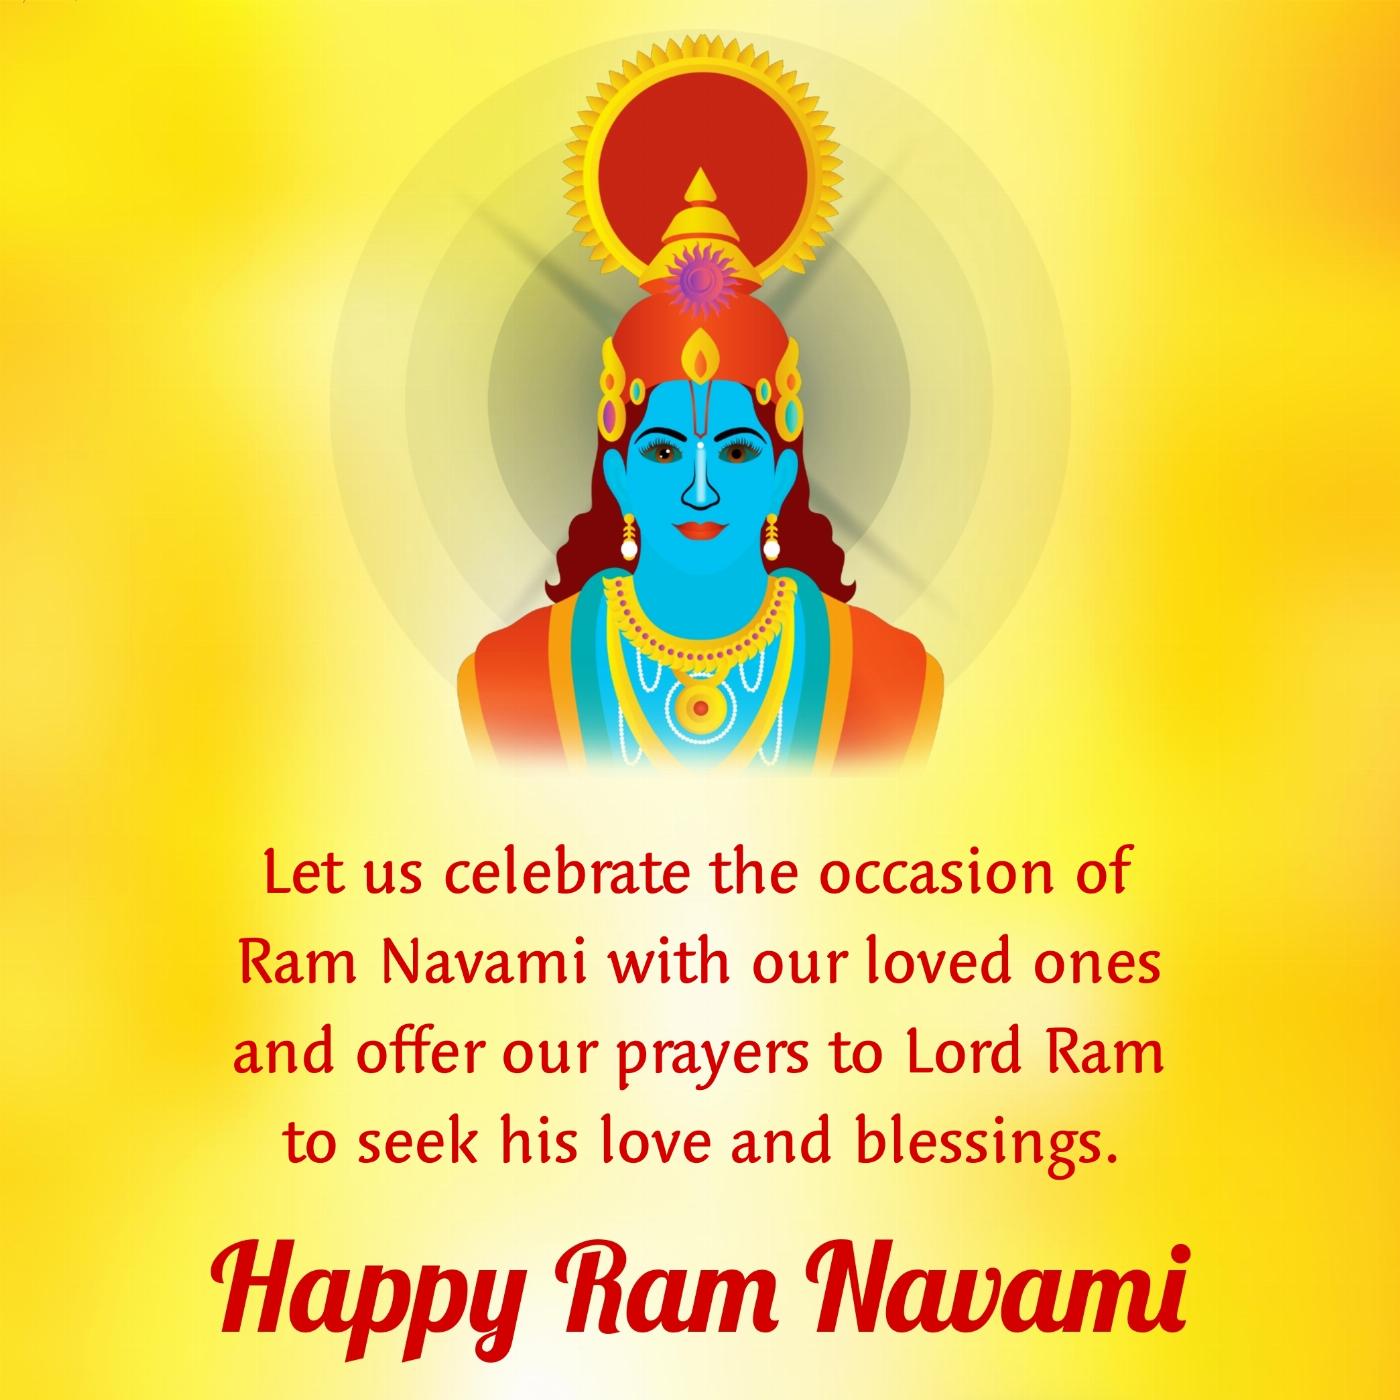 Let us celebrate the occasion of Ram Navami with our loved ones